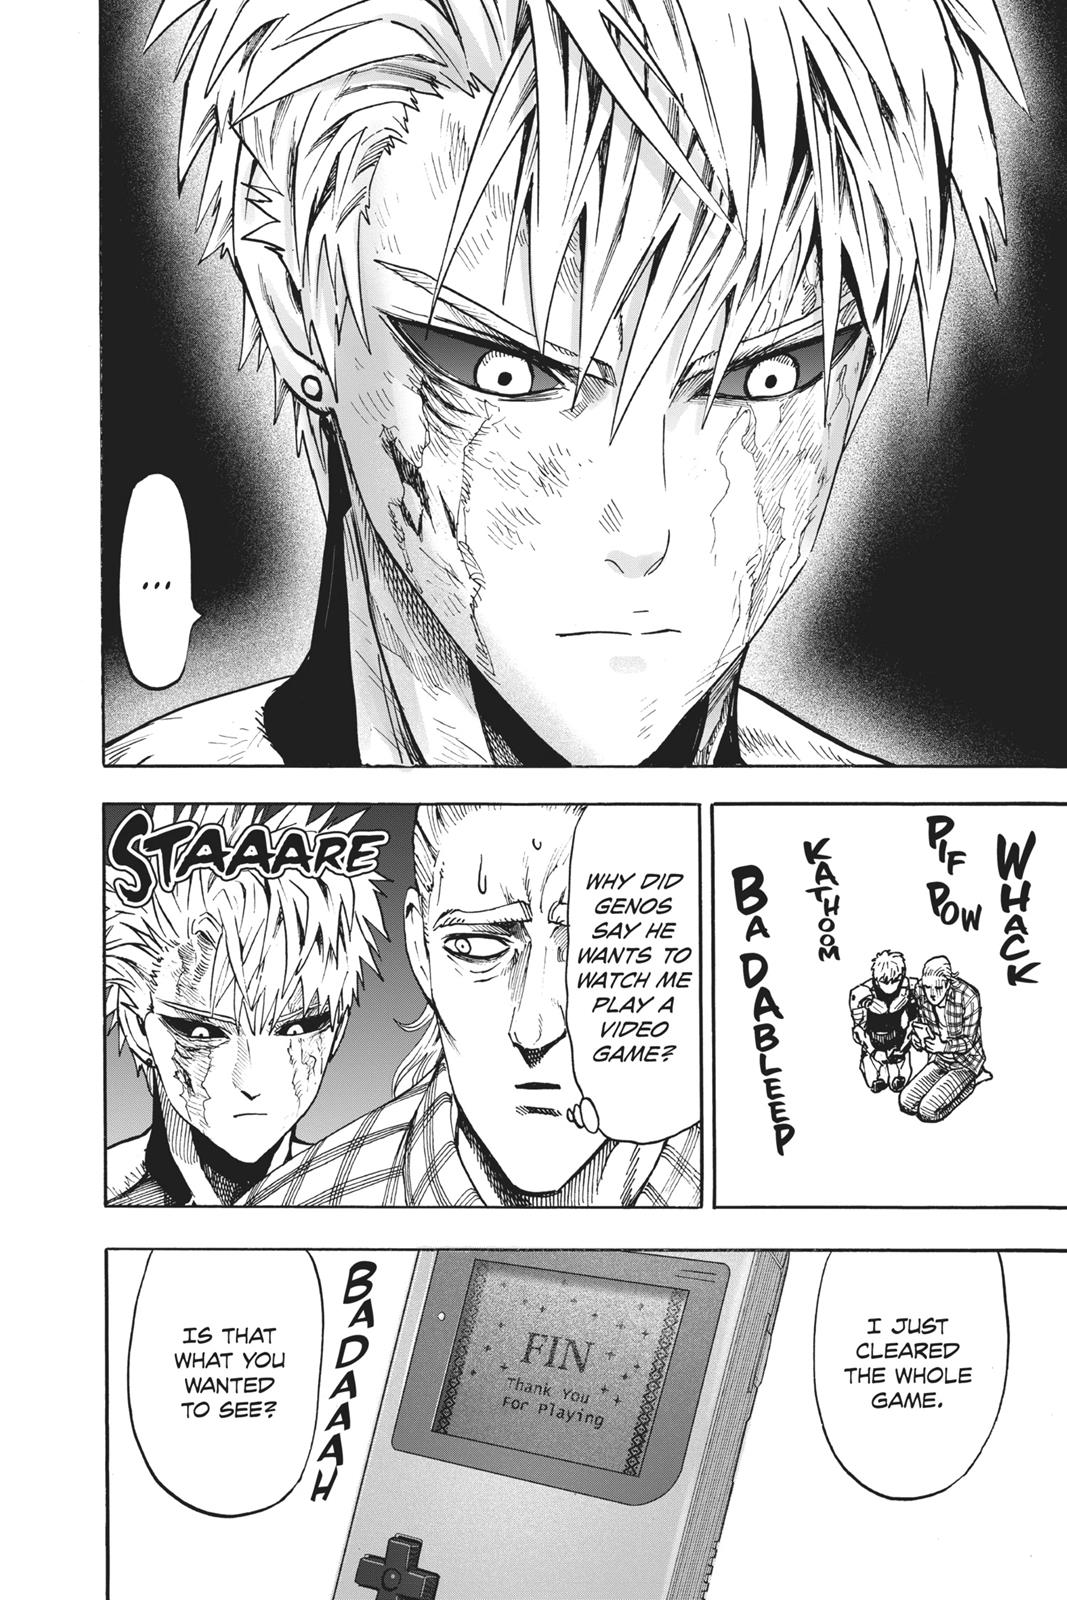 One-Punch Man, Punch 90 image 02